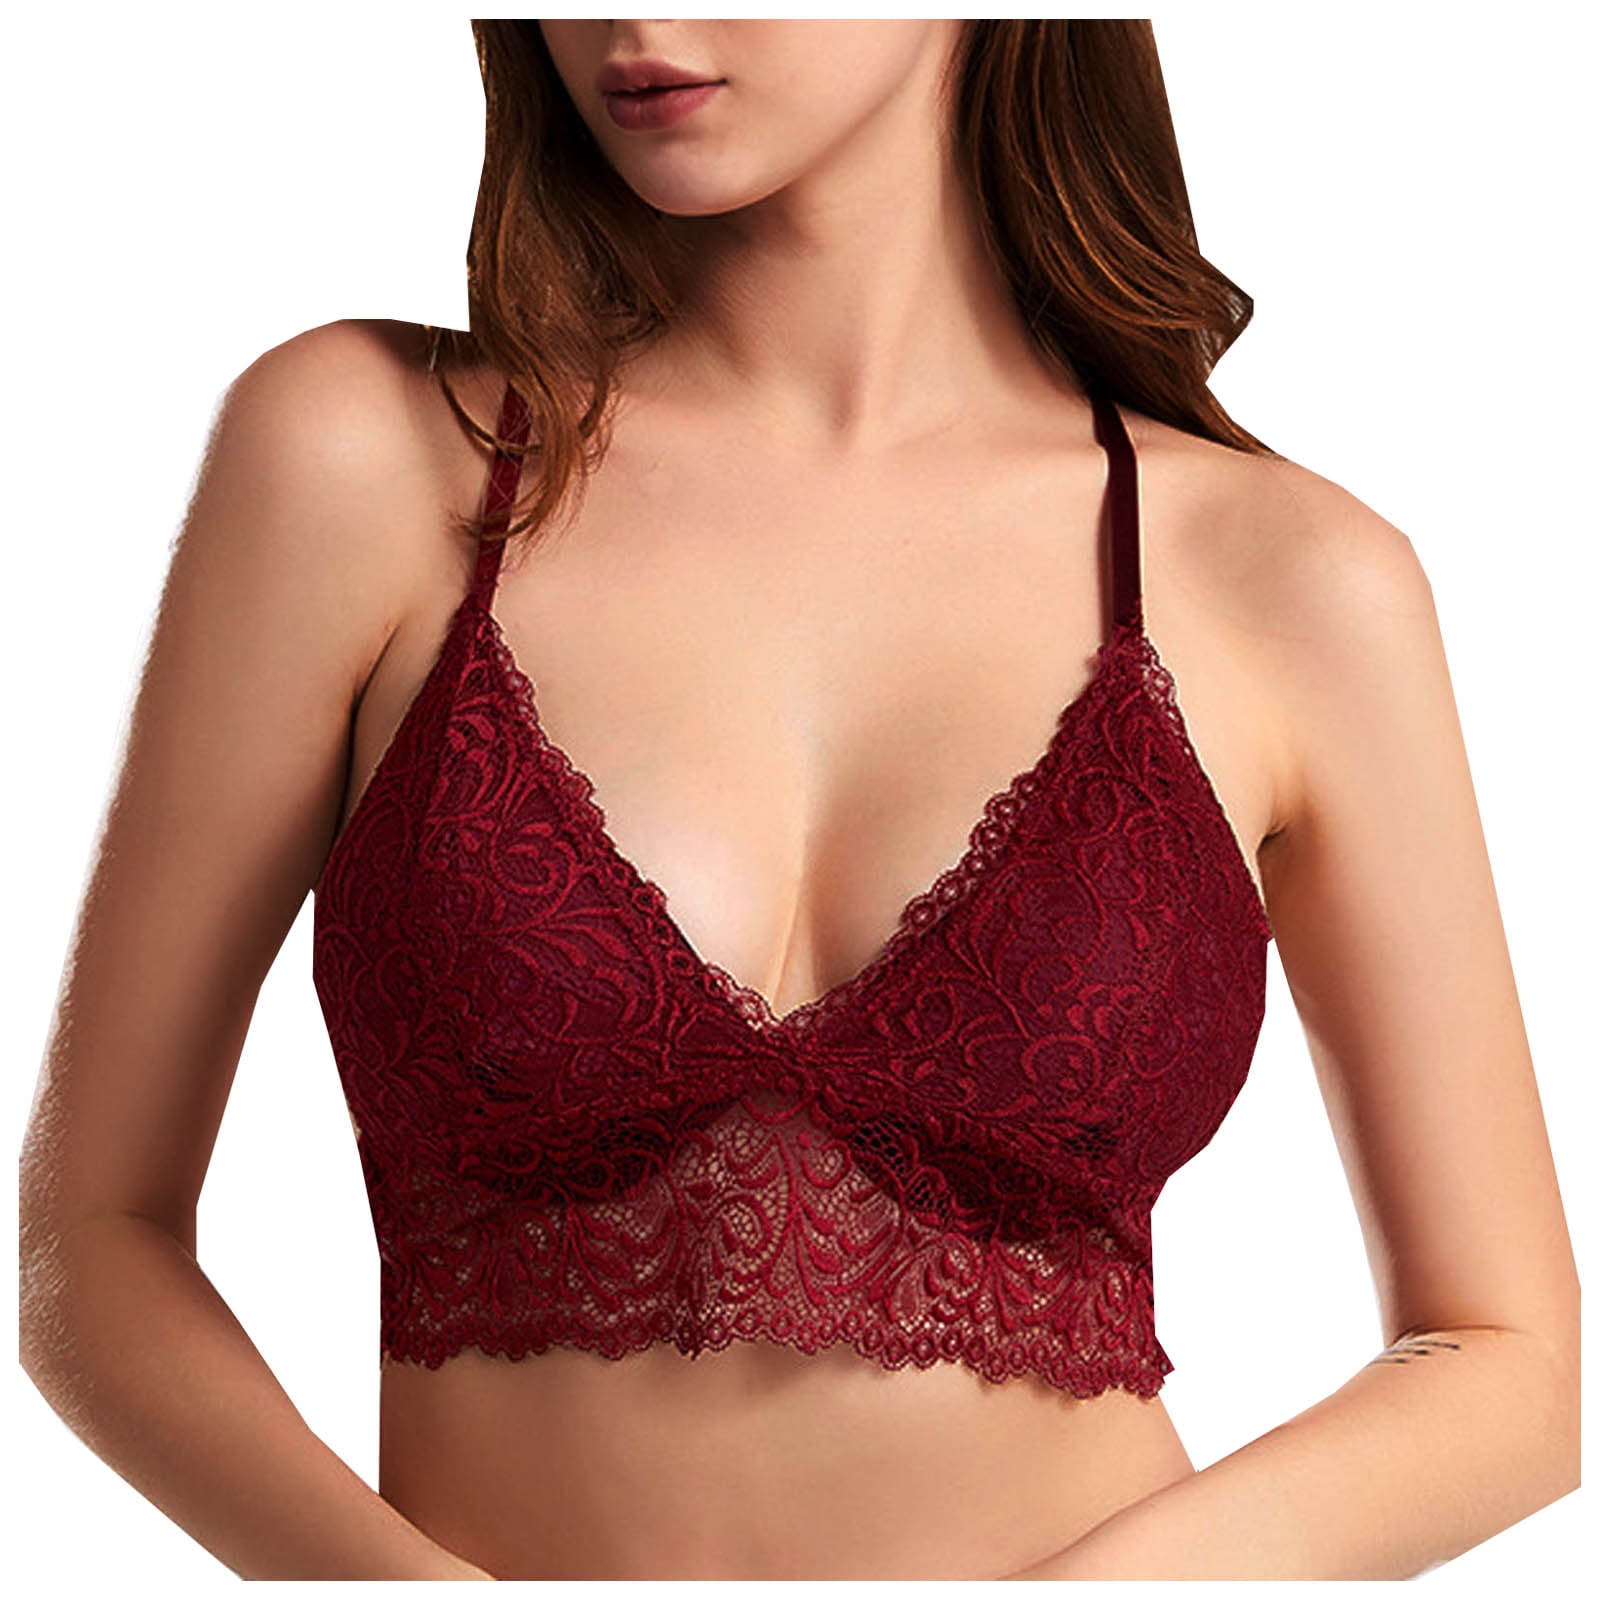 Best Deal for Lace Bralettes for Women 1 pc Lace Bra Camisole Bra